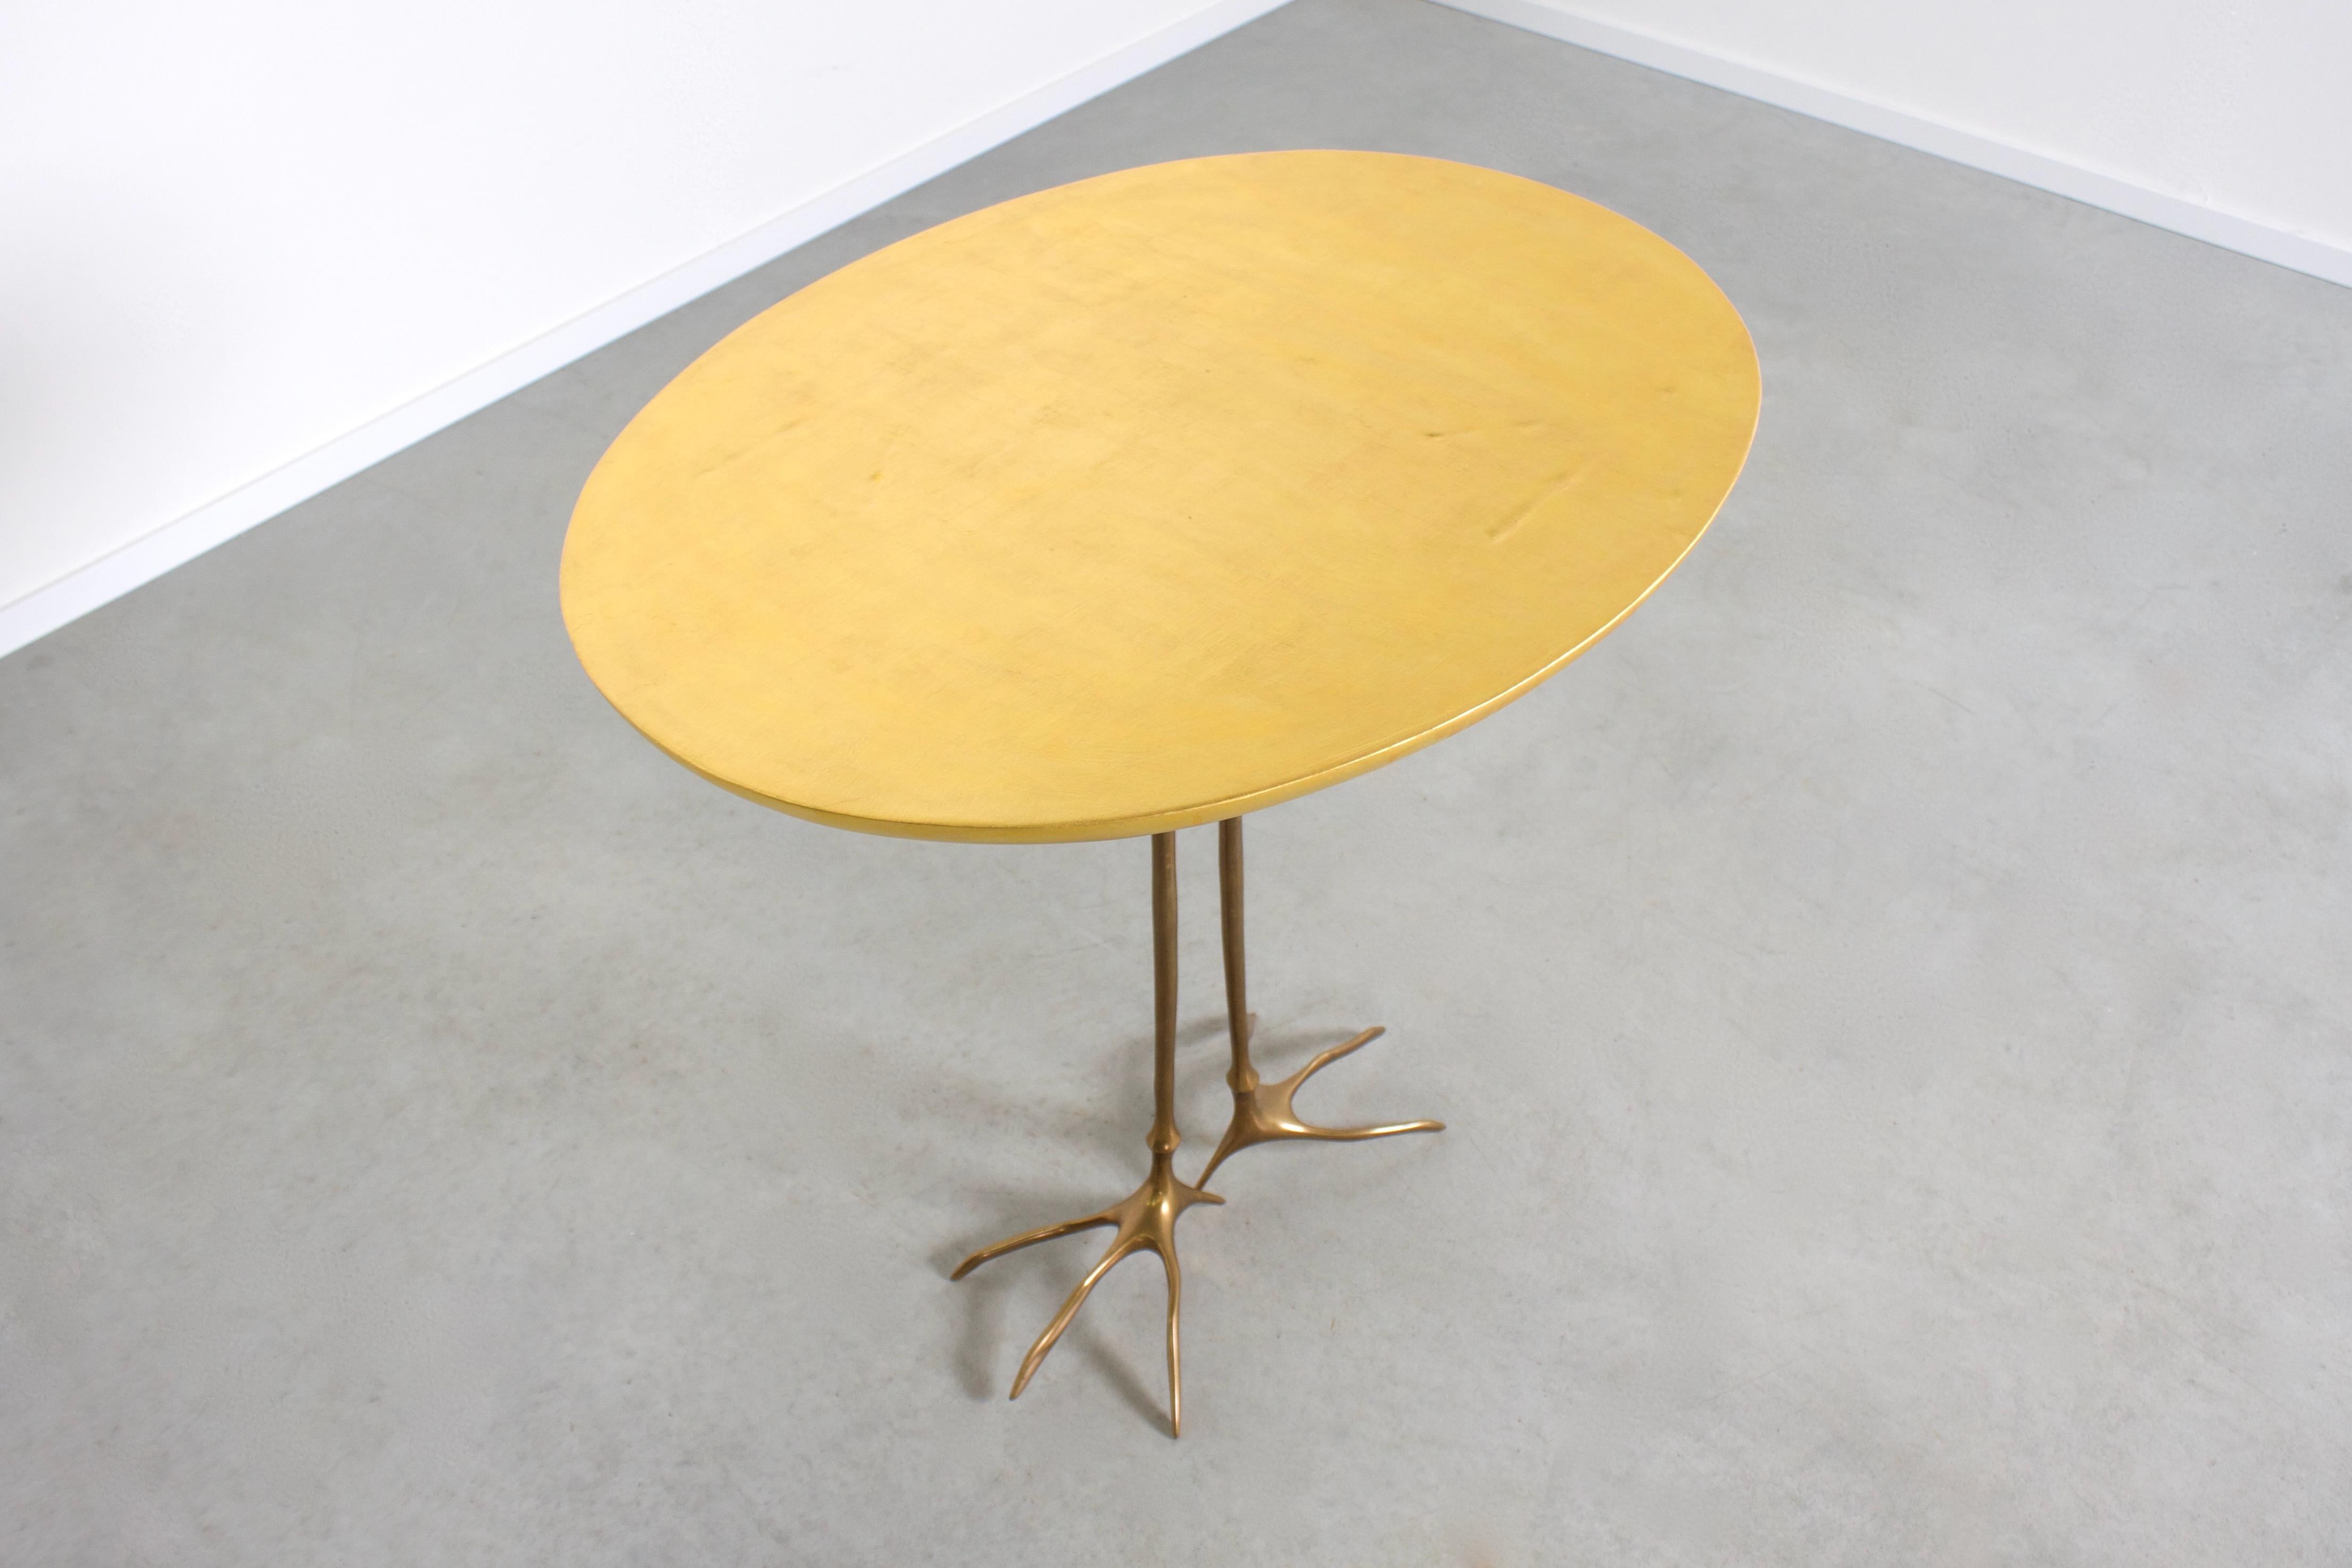 Original ’Traccia’ table in very good condition.

Designed by Meret Oppenheim 

Produced by Studio Simon’s Collezione Ultramobili, Milan, 1972

The tabletop is covered in gold leaf and has bird tracks embossed in the surface.

The top rests on two